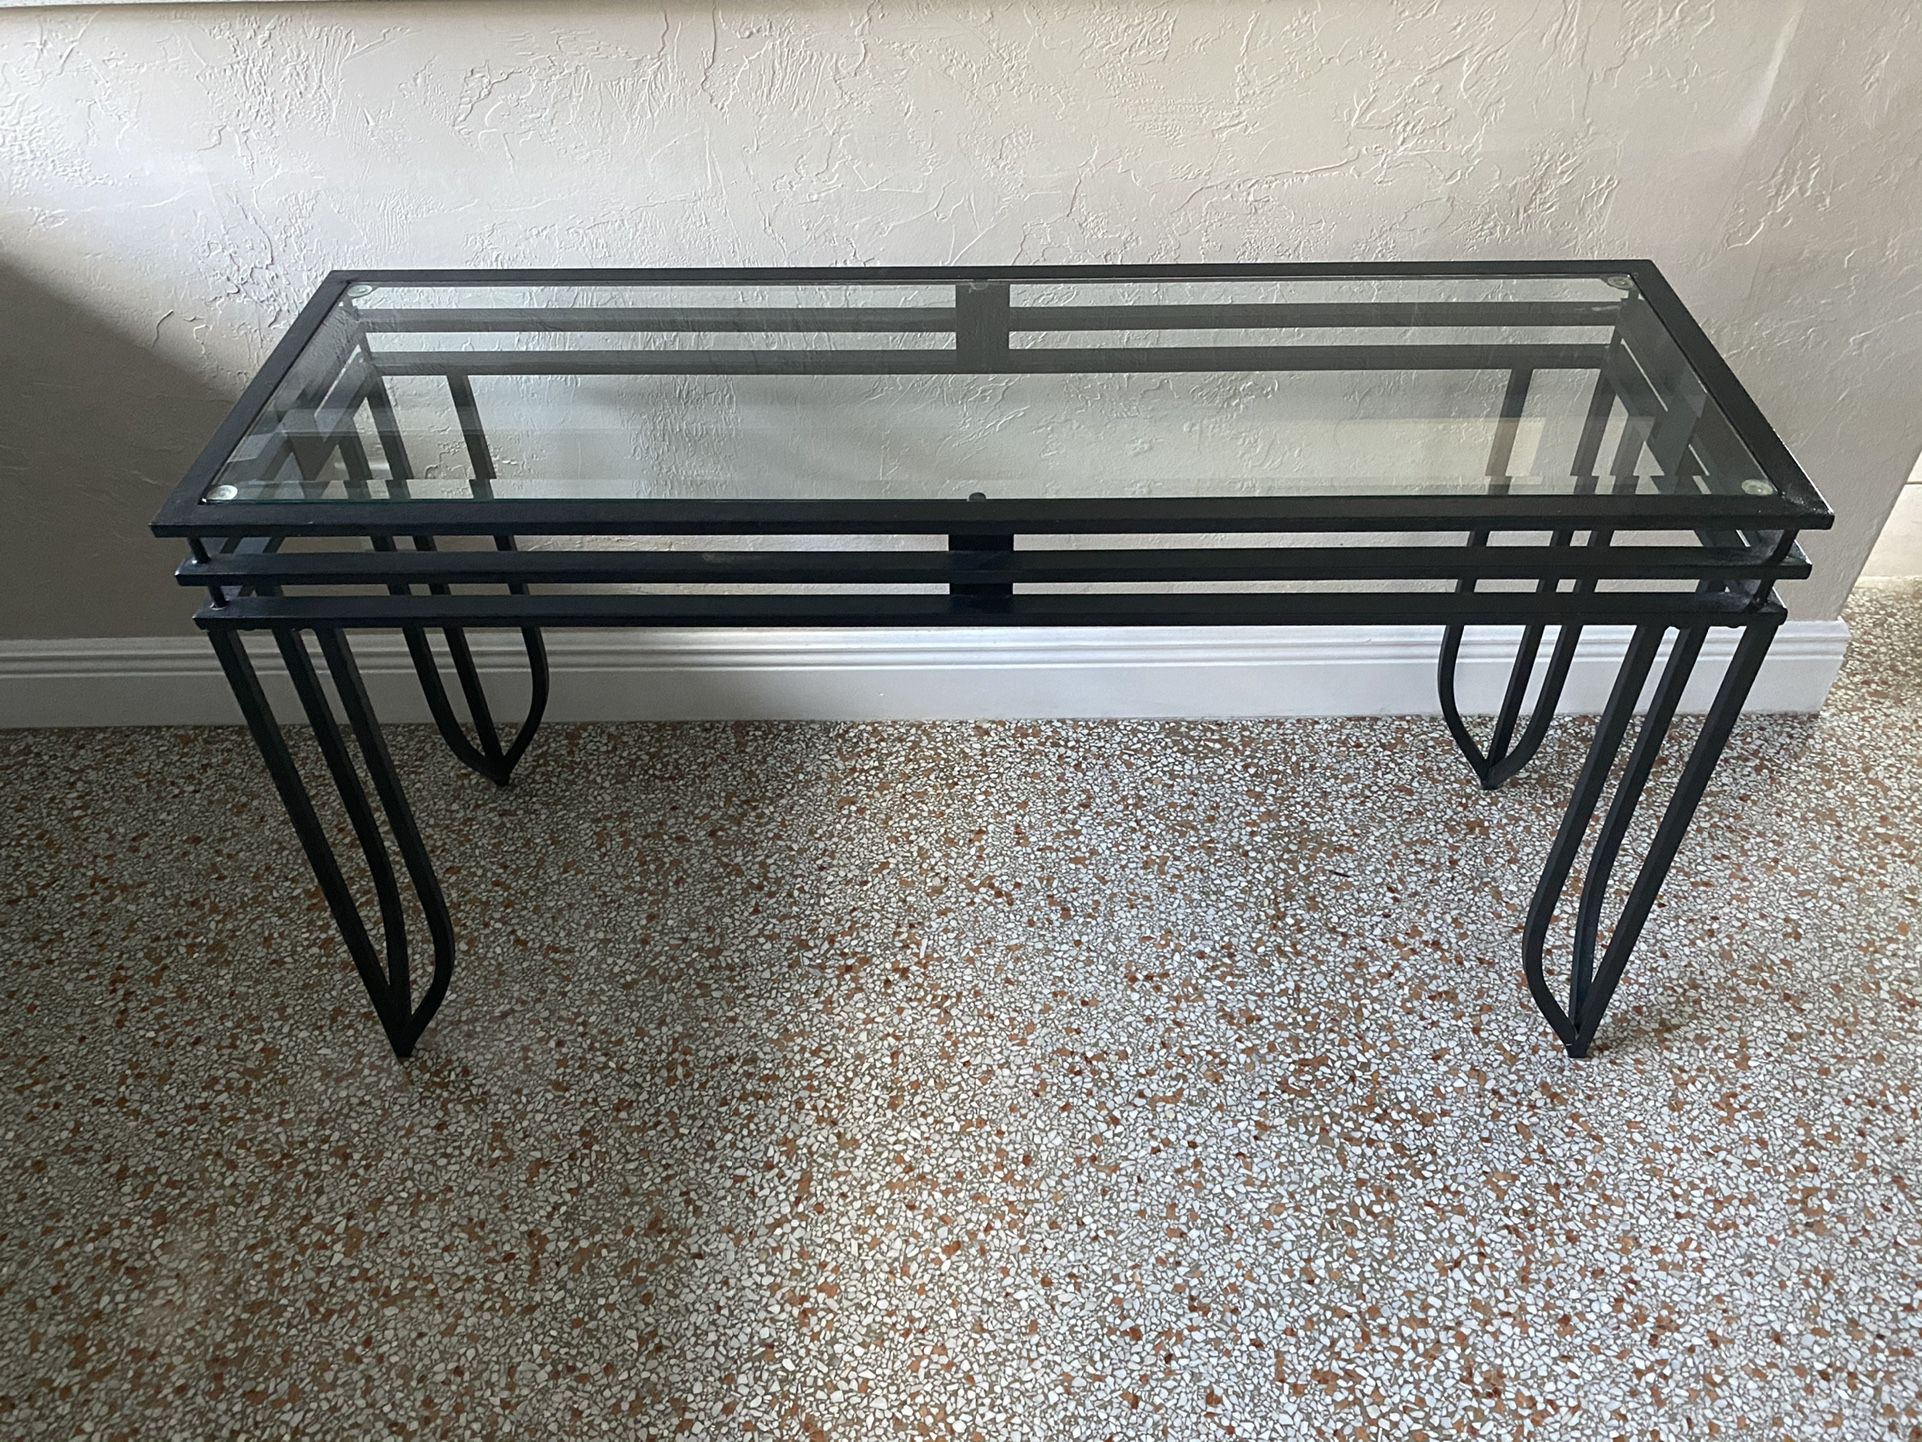 One Glass black metal table, kitchen plant stand TV 16” deep, 4’ wide, 26.5 tall indoor outdoor